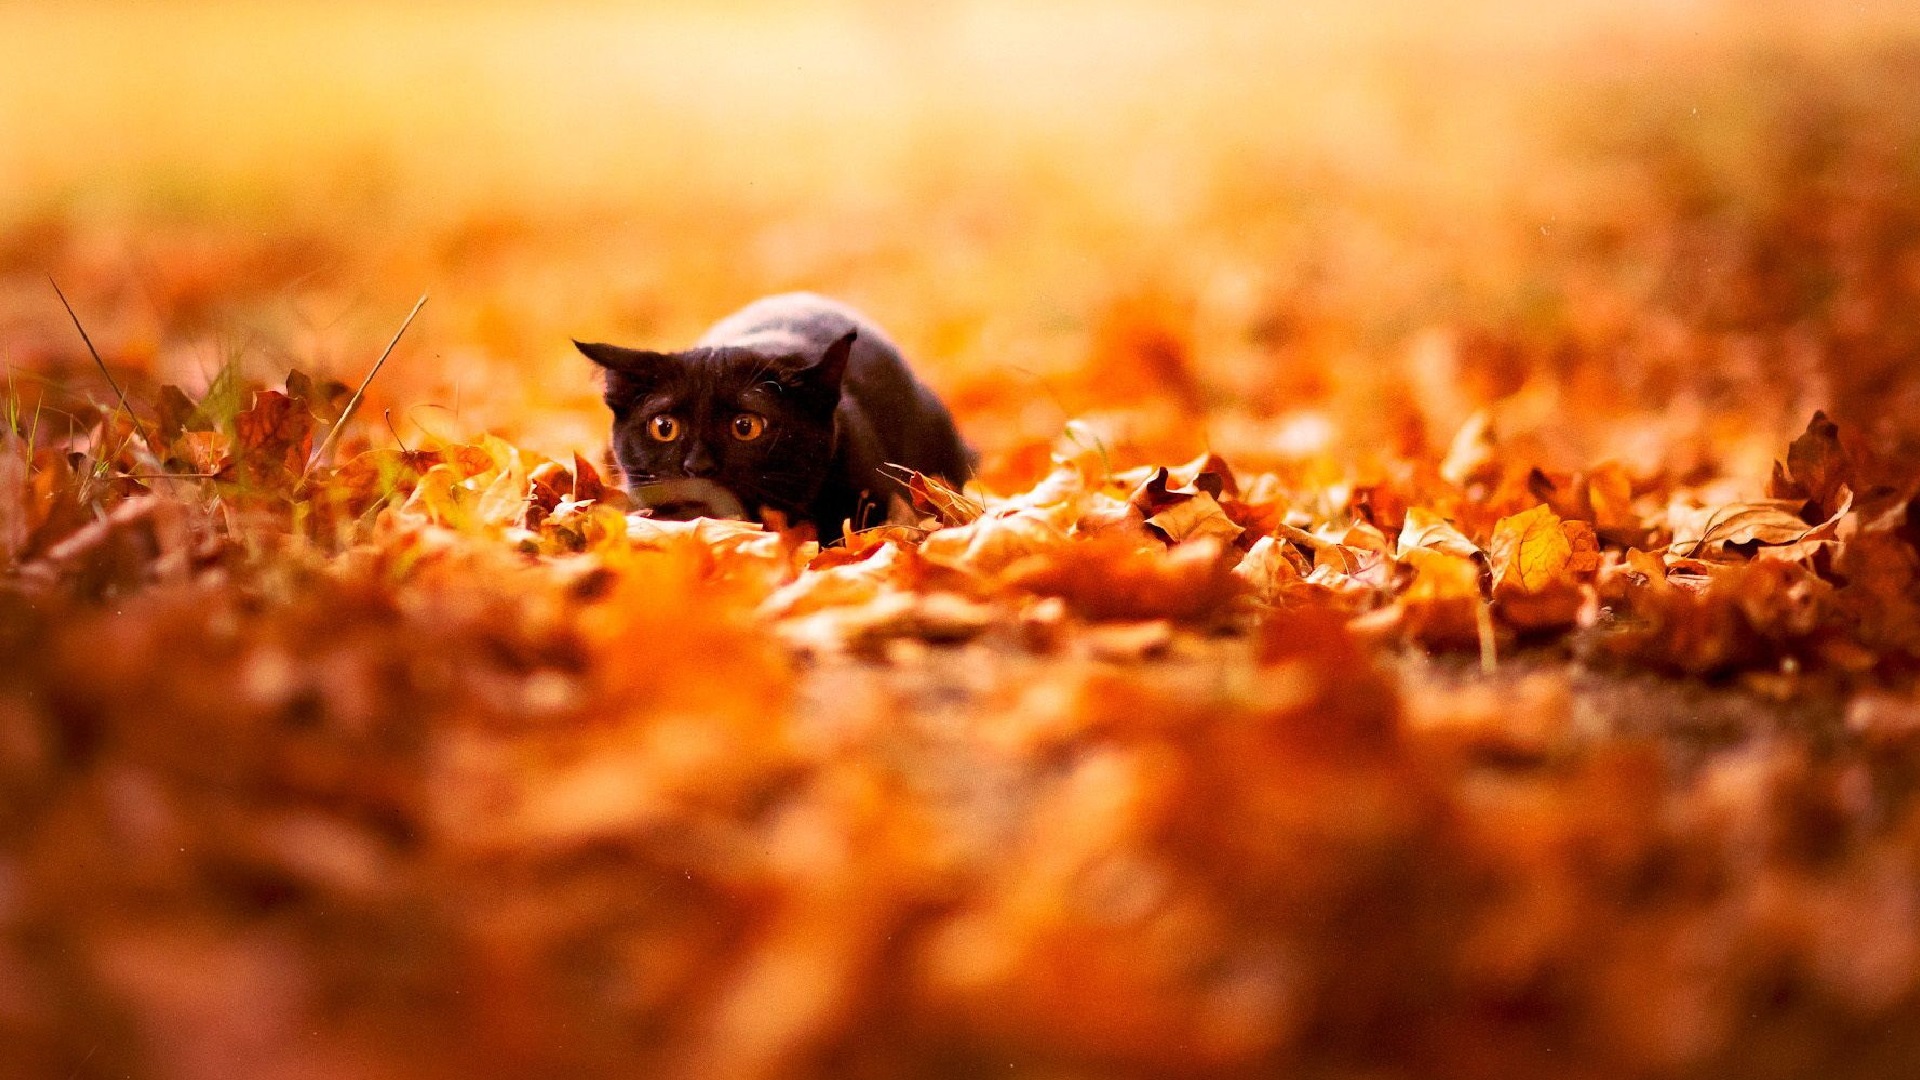 Best Cute Fall Wallpaper With high-resolution 1920X1080 pixel. You can use this wallpaper for your Desktop Computer Backgrounds, Mac Wallpapers, Android Lock screen or iPhone Screensavers and another smartphone device